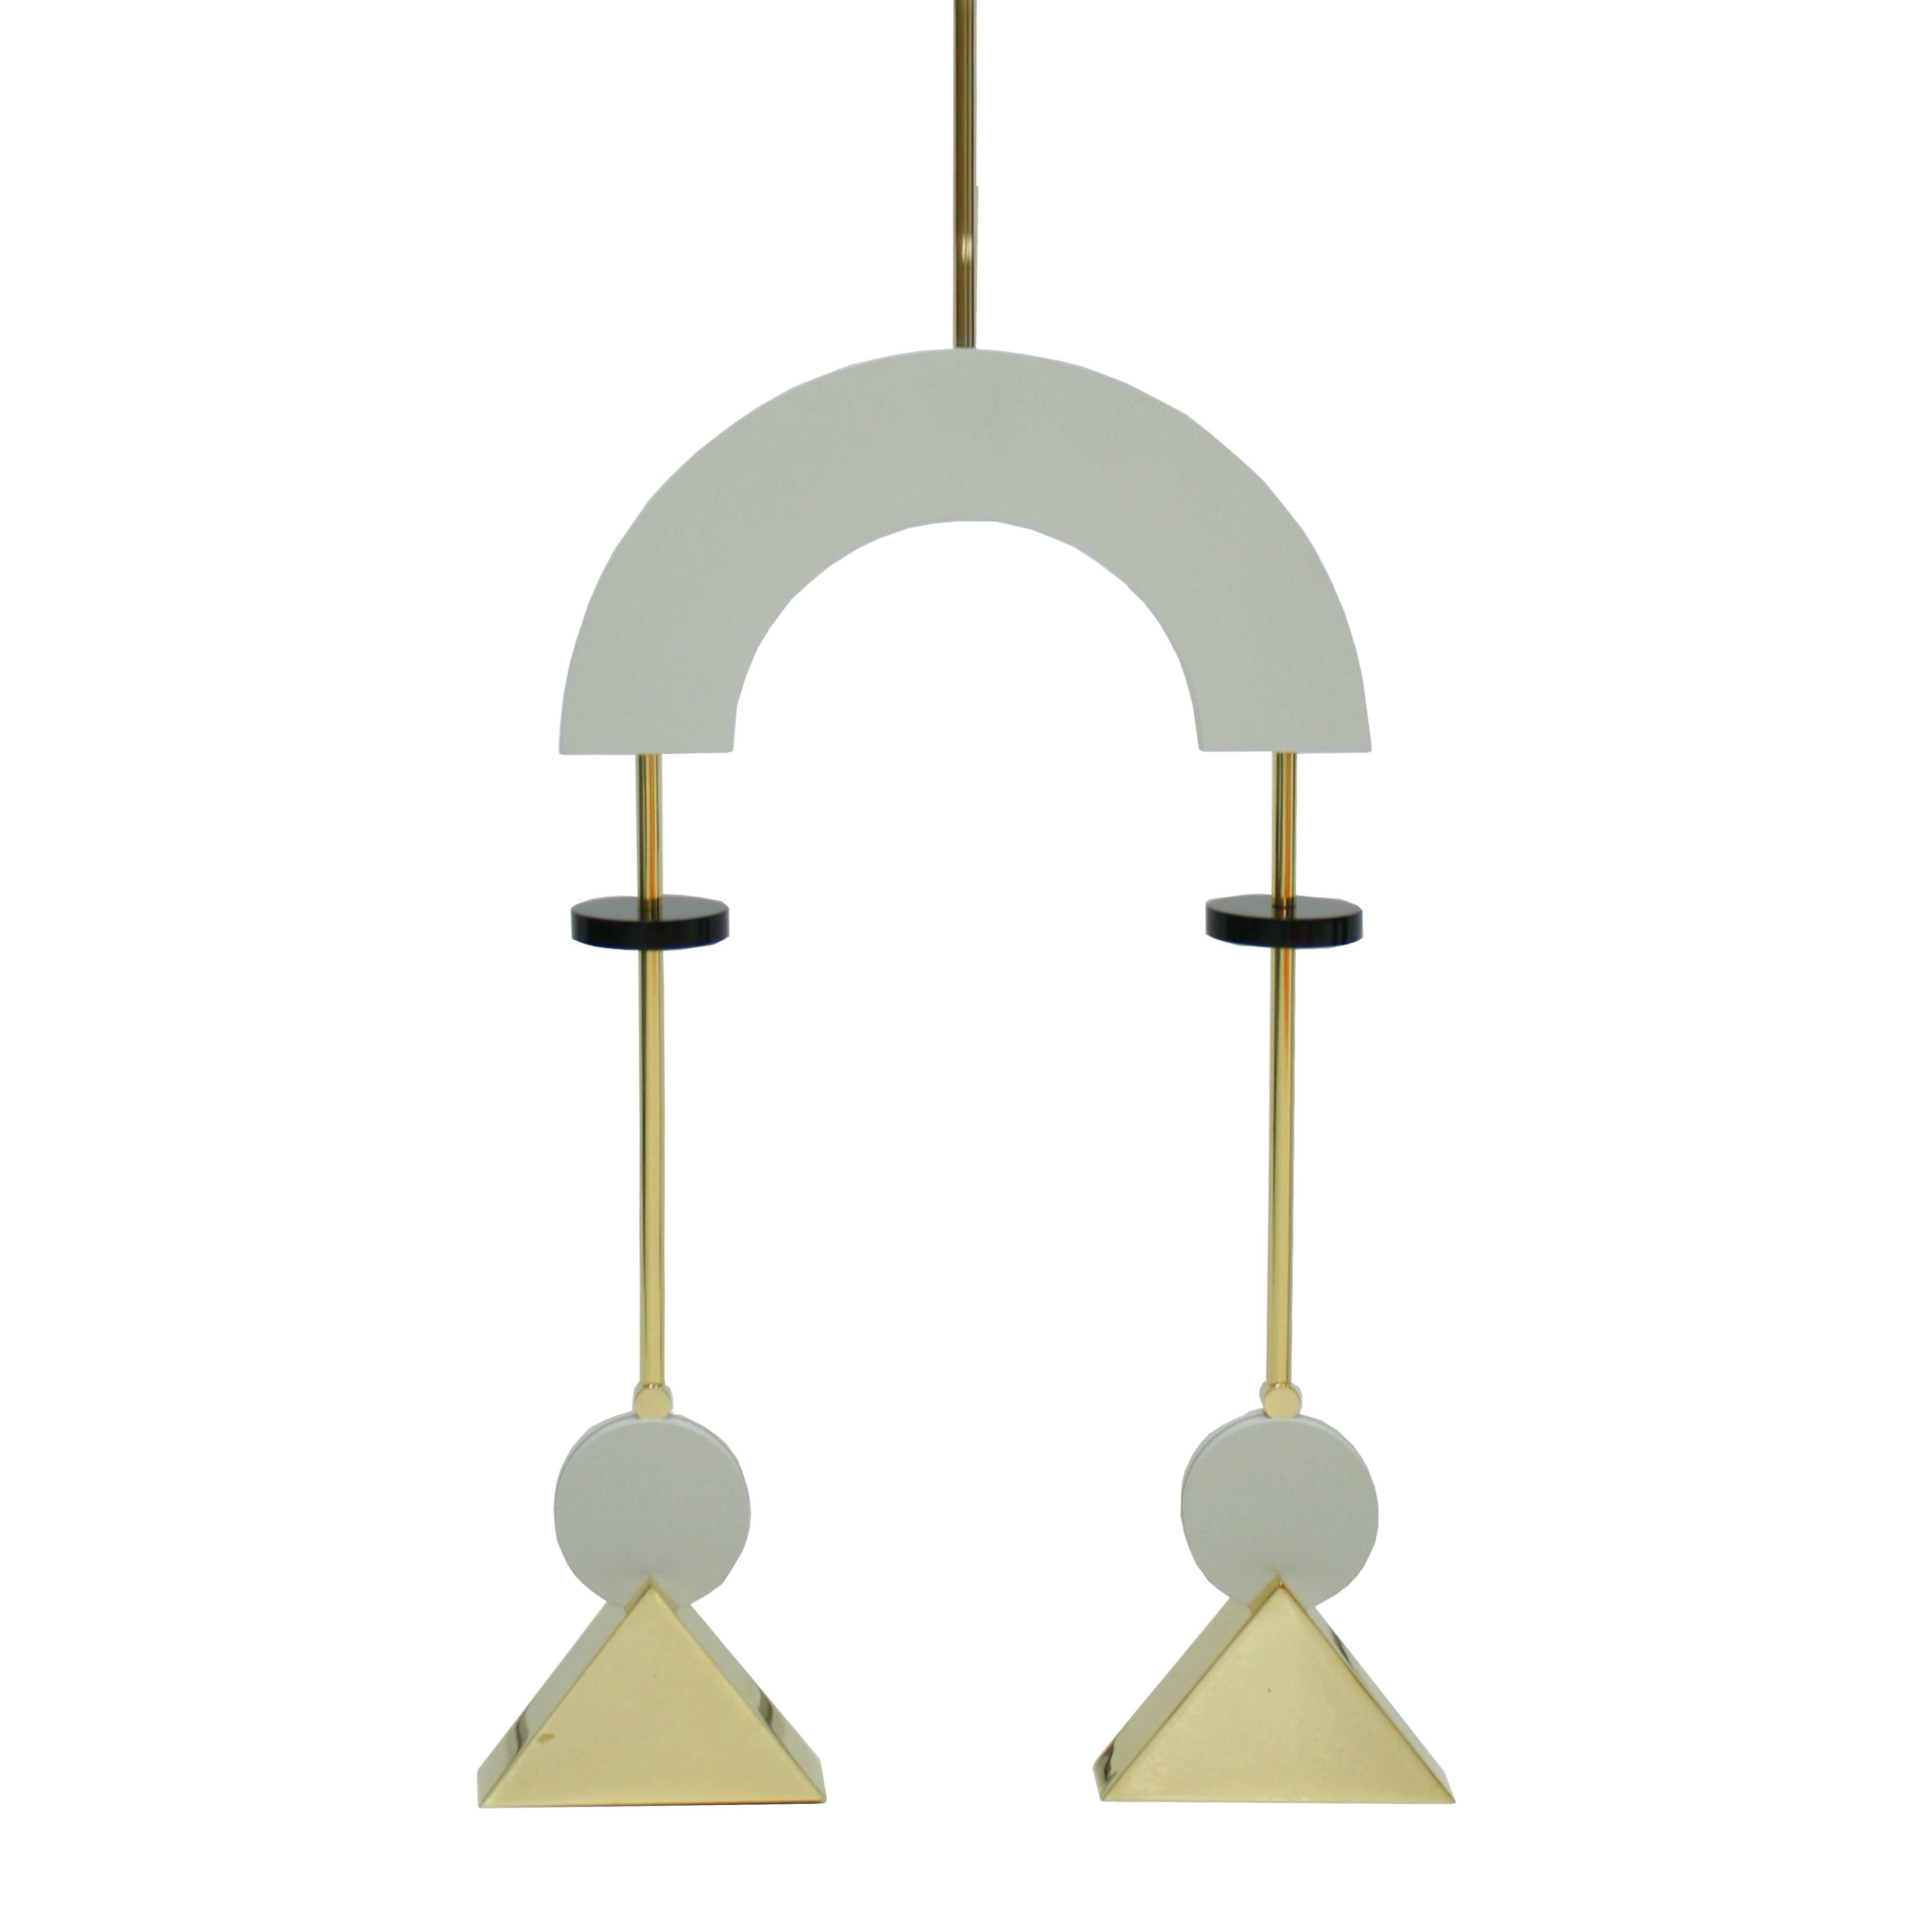 Pendant lamps composed of two points of light. Made of gold-plated bronze structure with white and black lacquered wood pieces. The design of this item was inspired by the radical geometry of constructivist art. The pendant lamp is constructed from